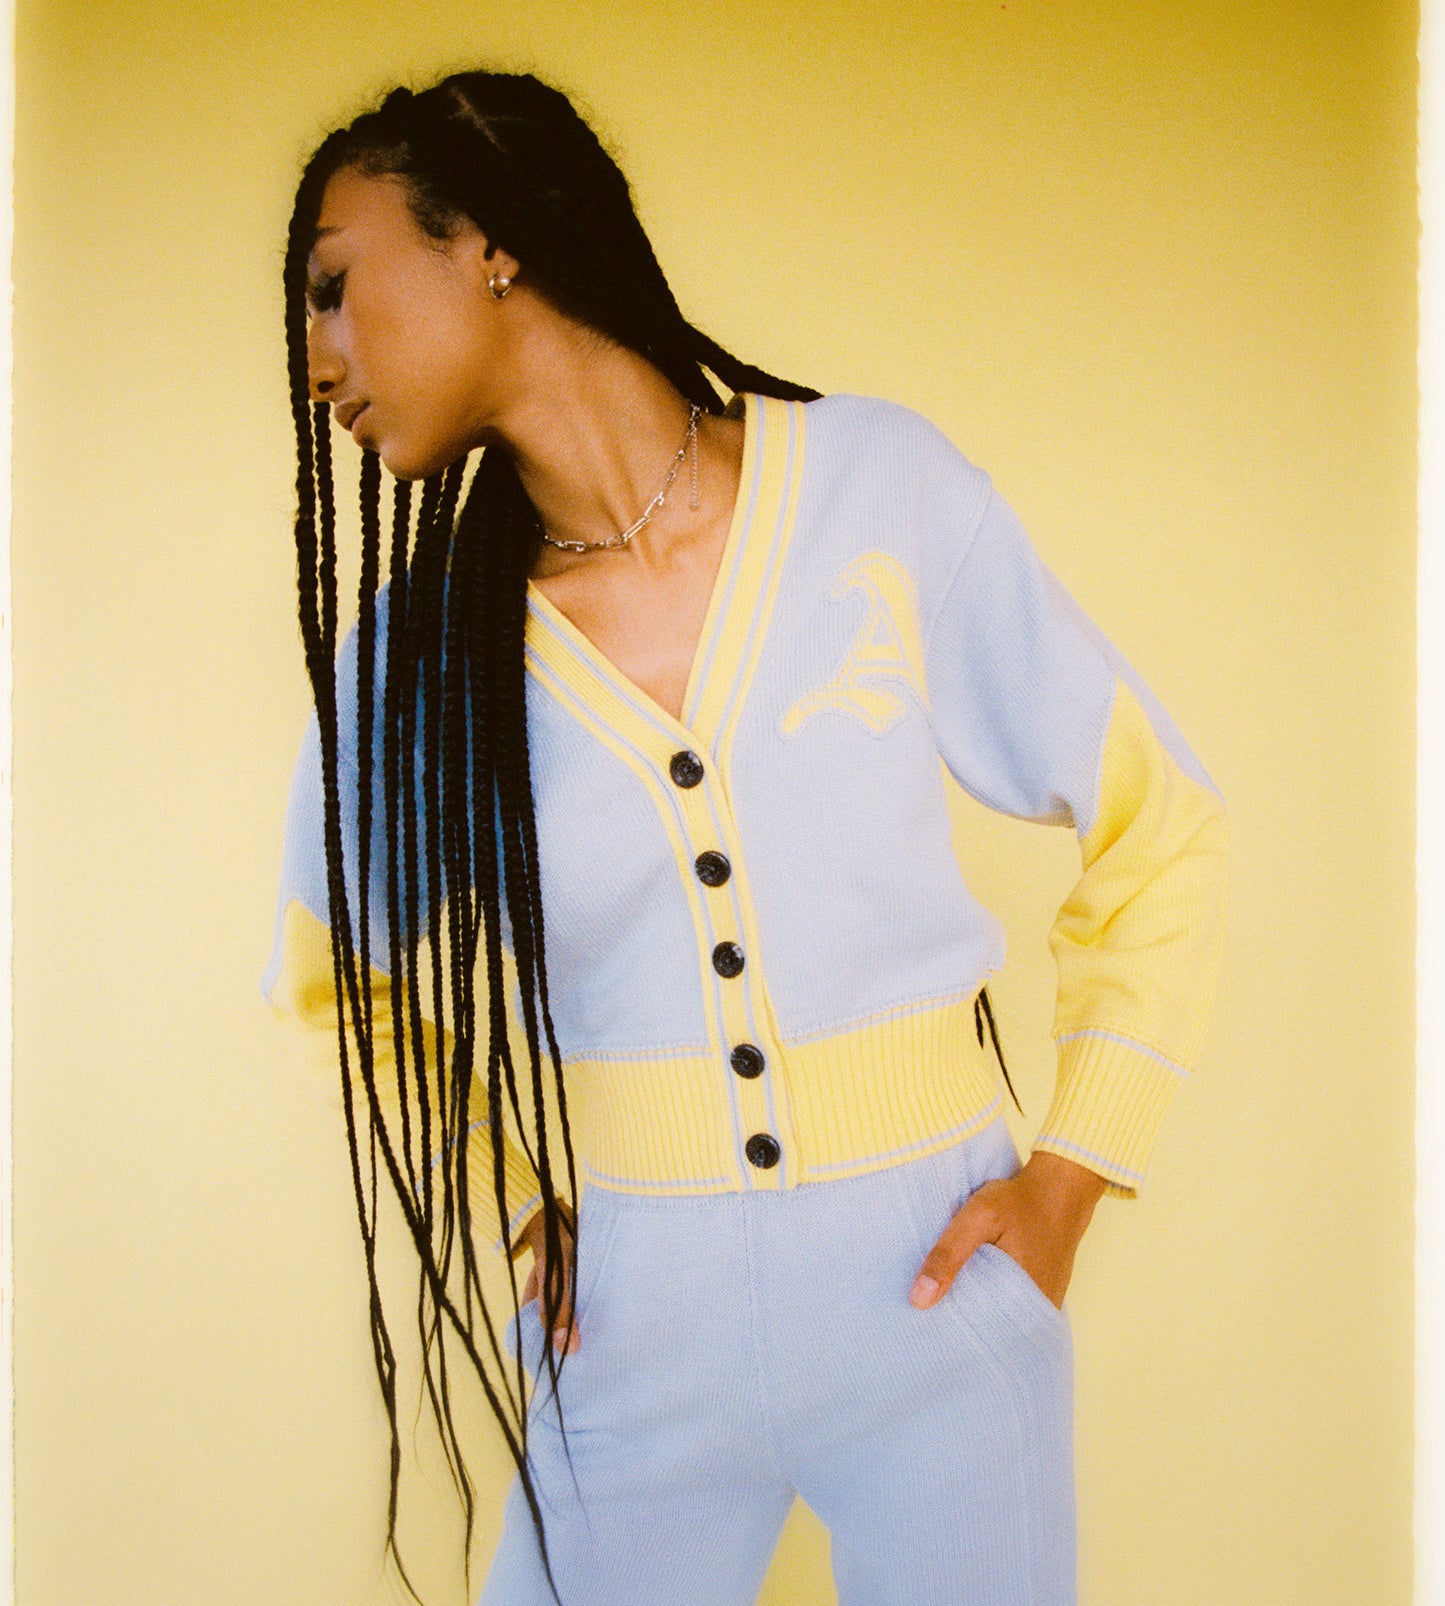 Model is wearing the Byrd Classic Knit Cardigan in Icy Blue and Butter Yellow. Pair with Byrd Classic Knit Pants for full matching look by Aseye Studio.